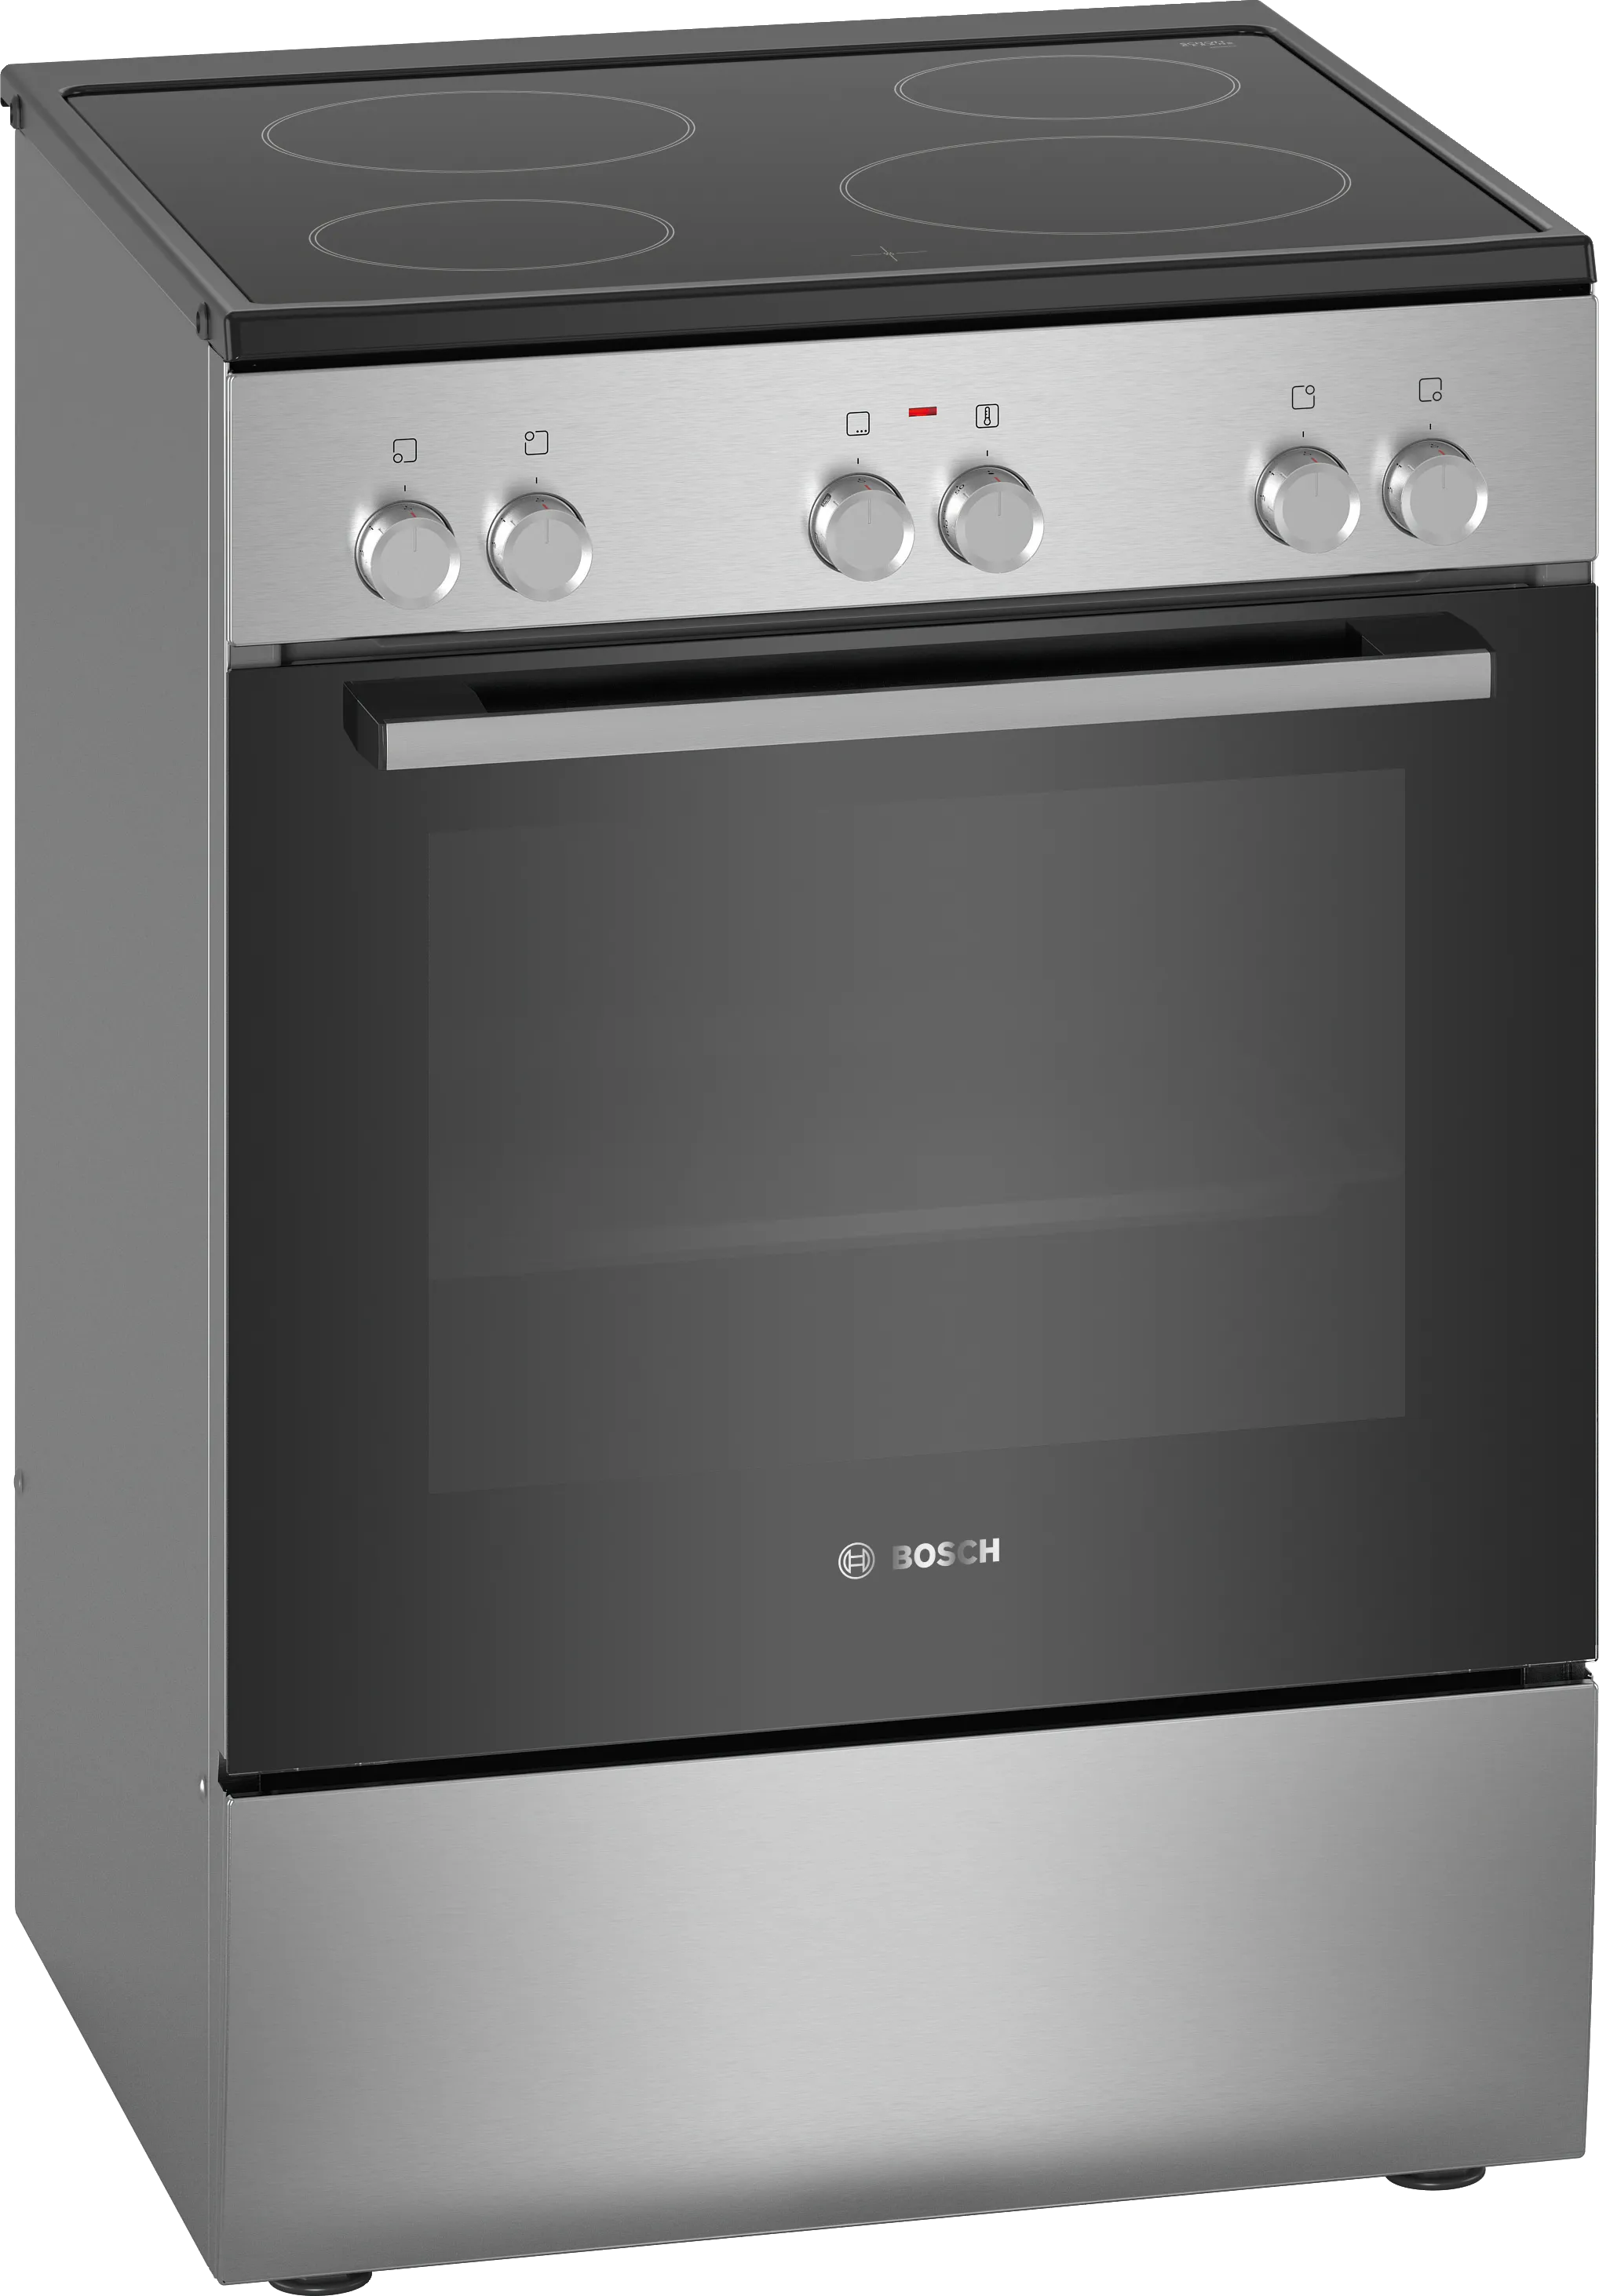 Series 2 Freestanding electric cooker Stainless steel 